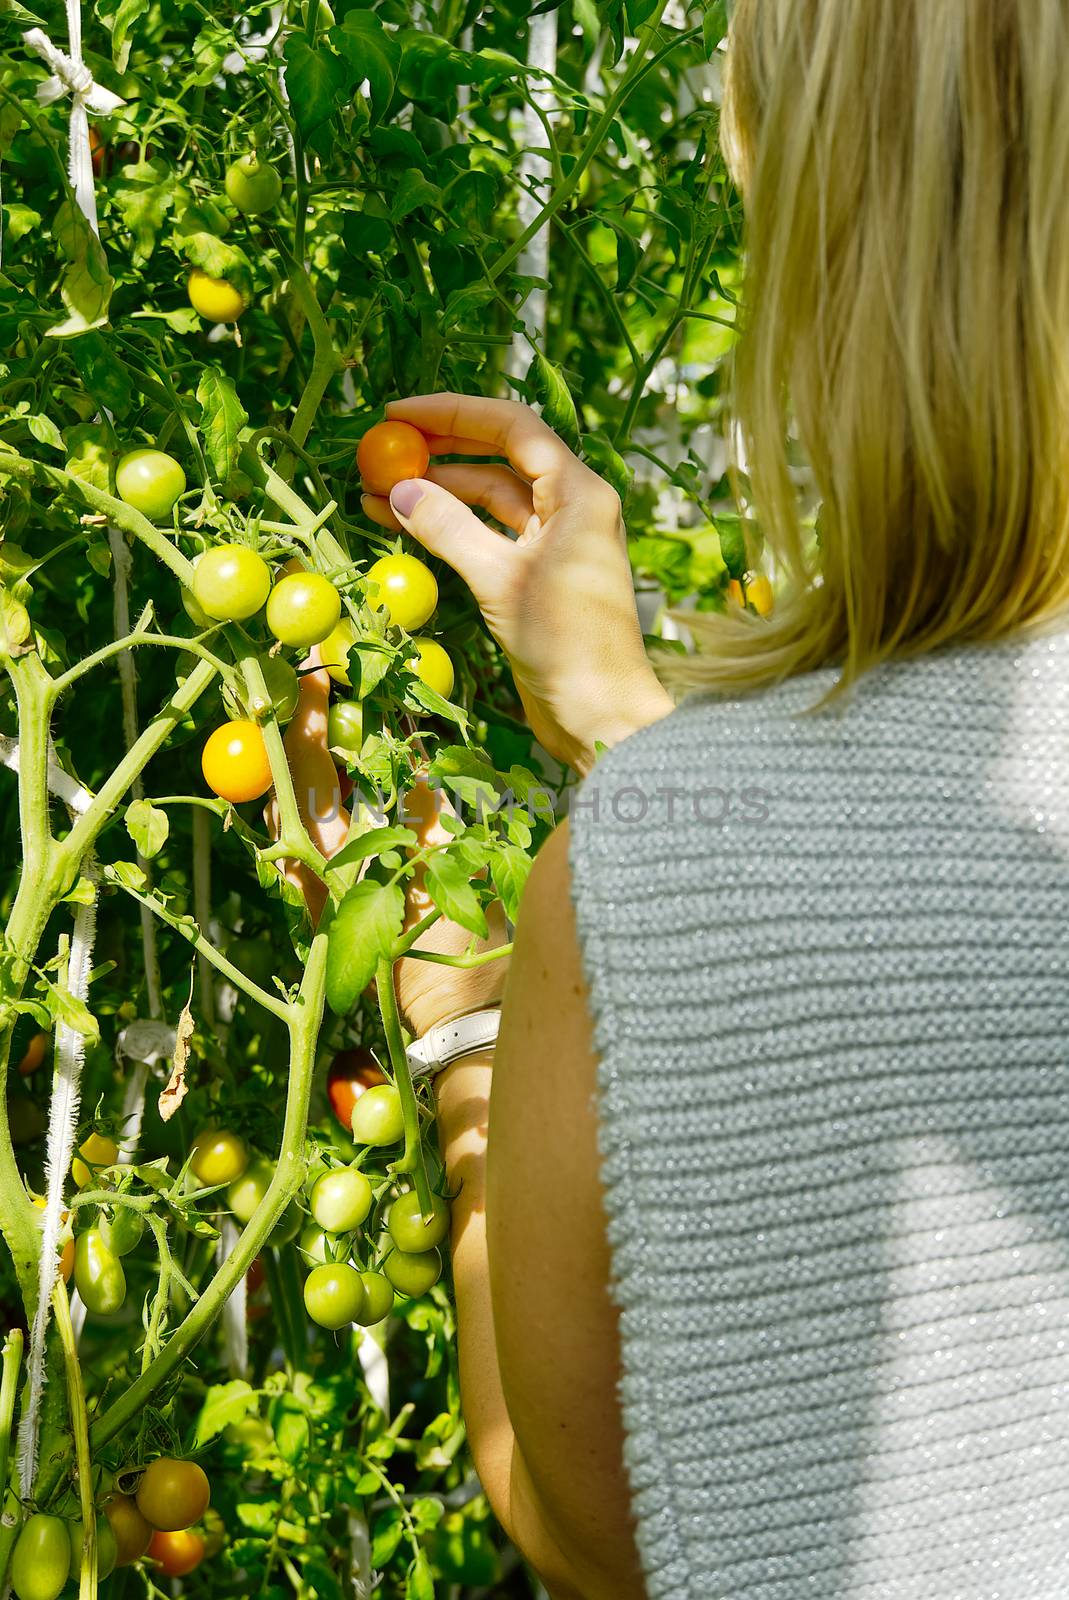 the gardener examines the quality of the yellow cherry tomatoes. Ripening cherry tomatoes in a greenhouse. Home gardening concept